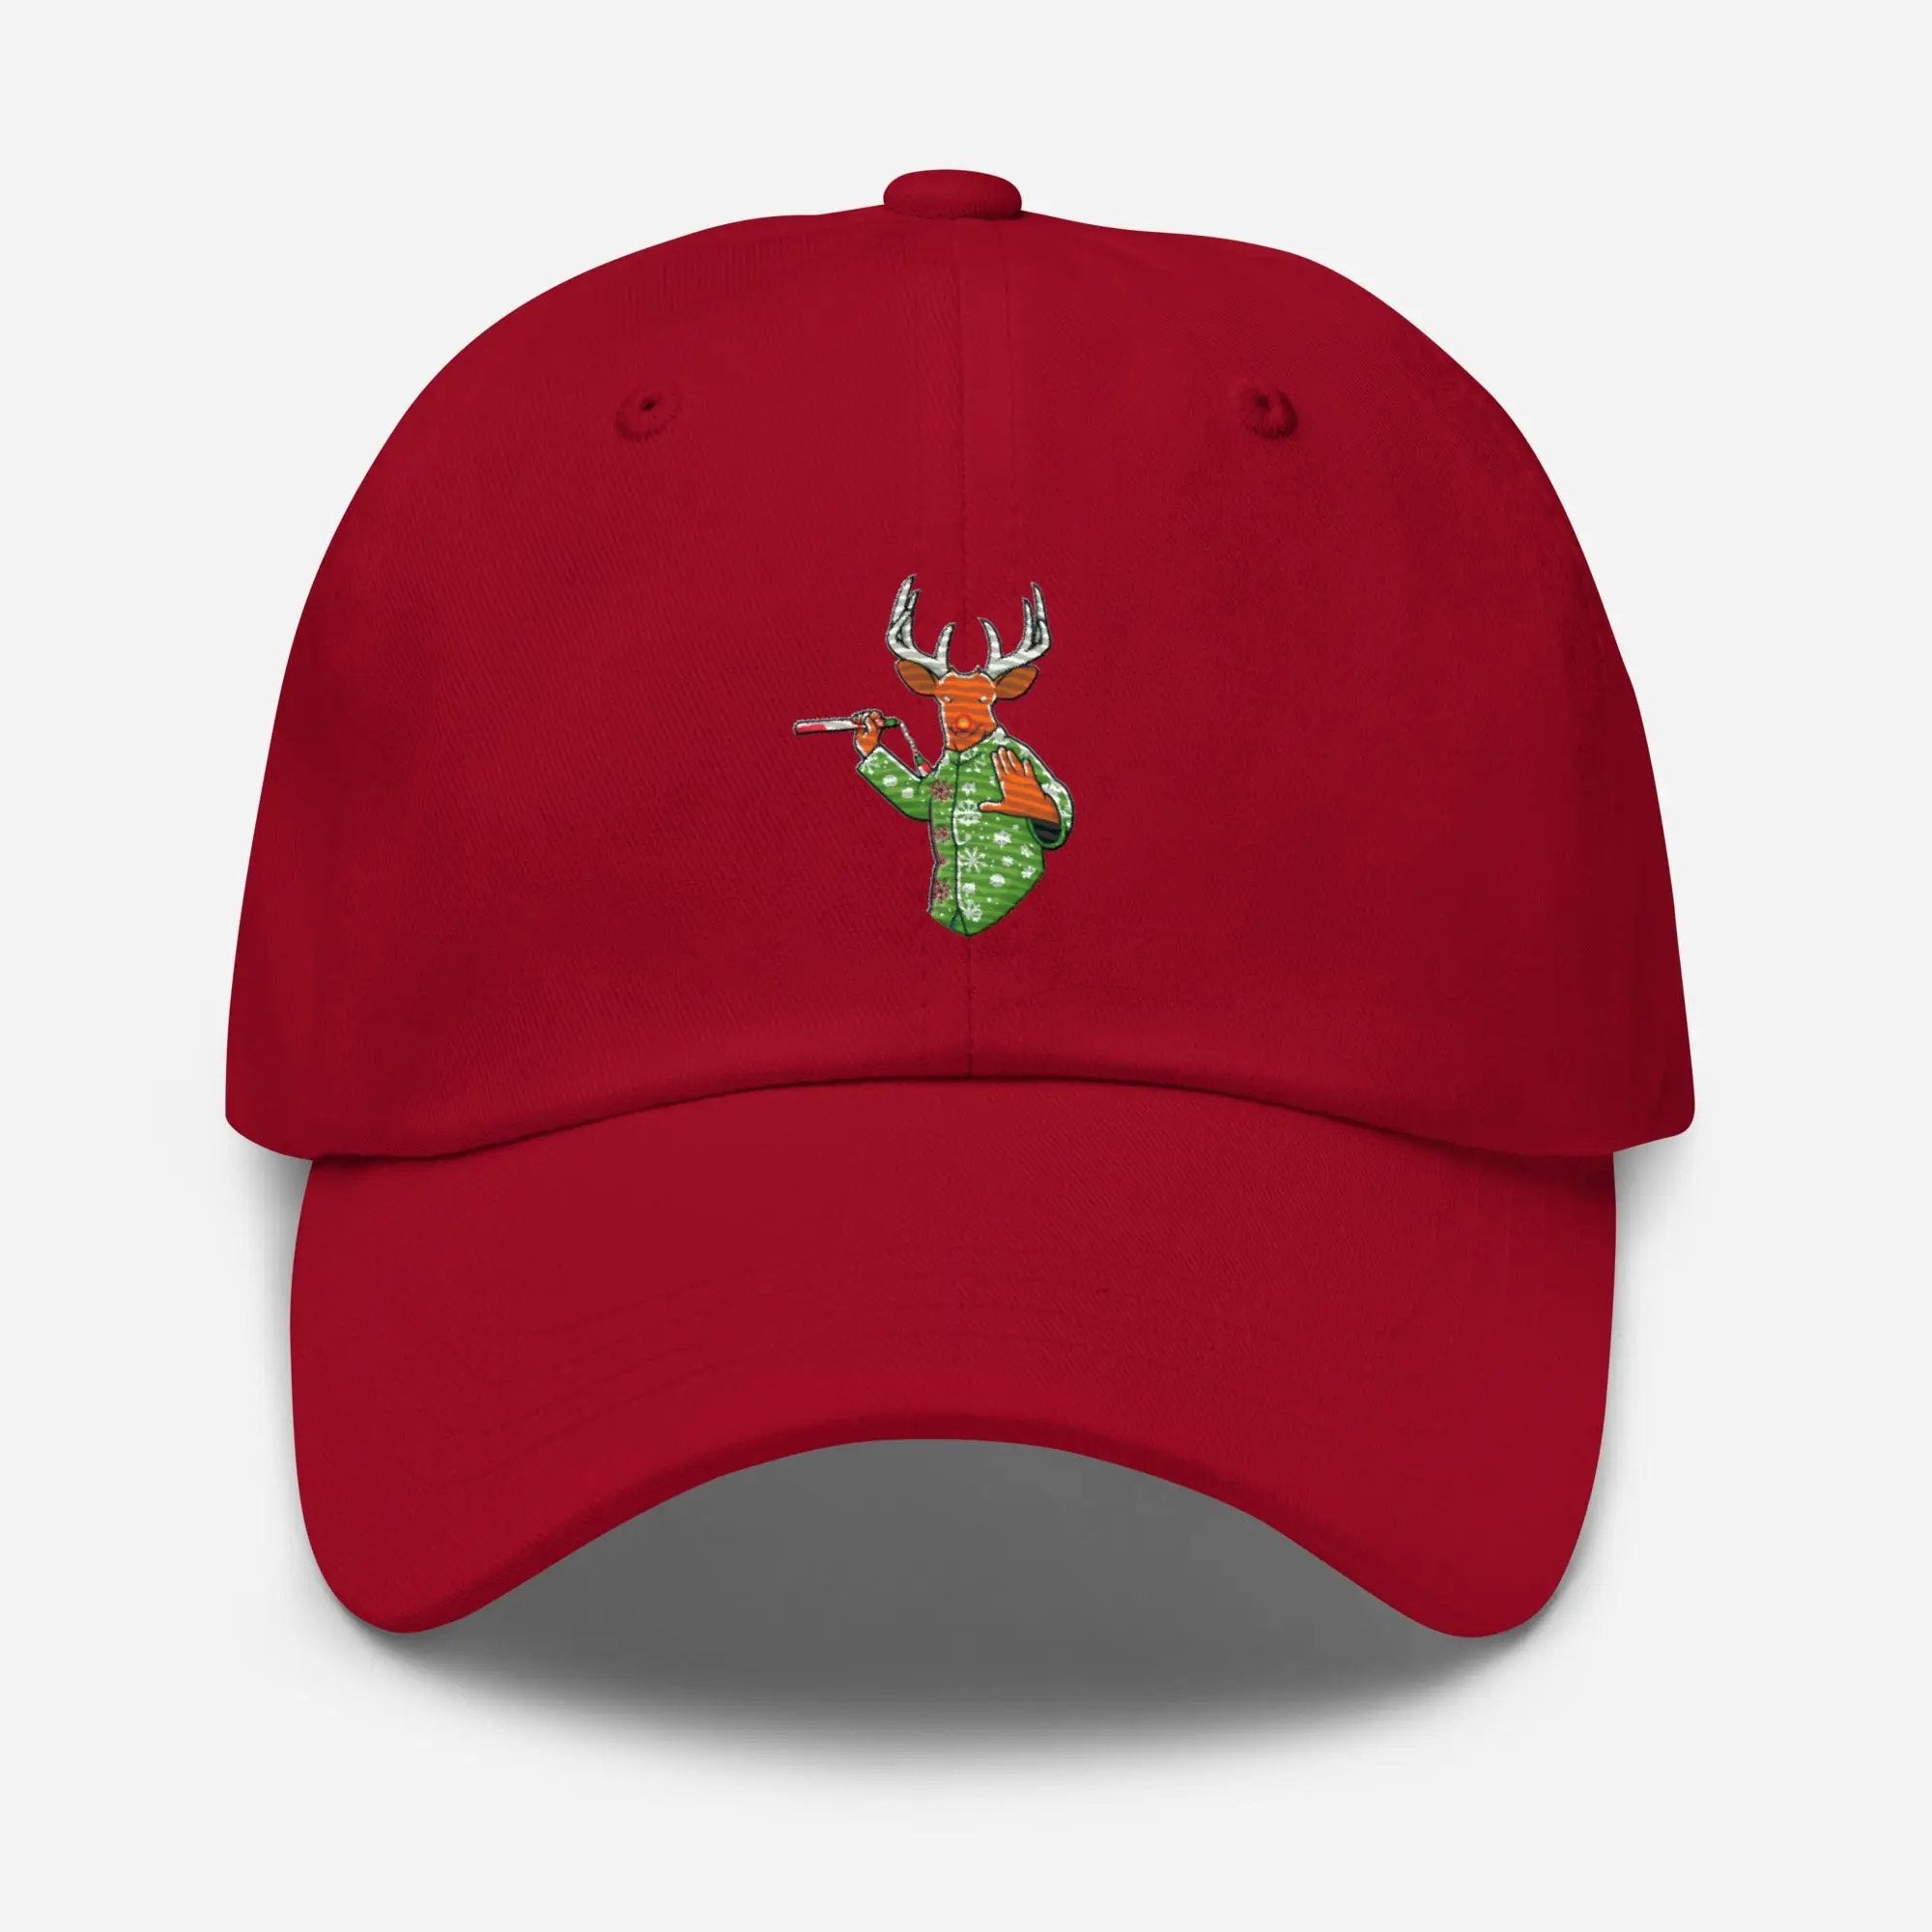 a red hat with a deer head on it